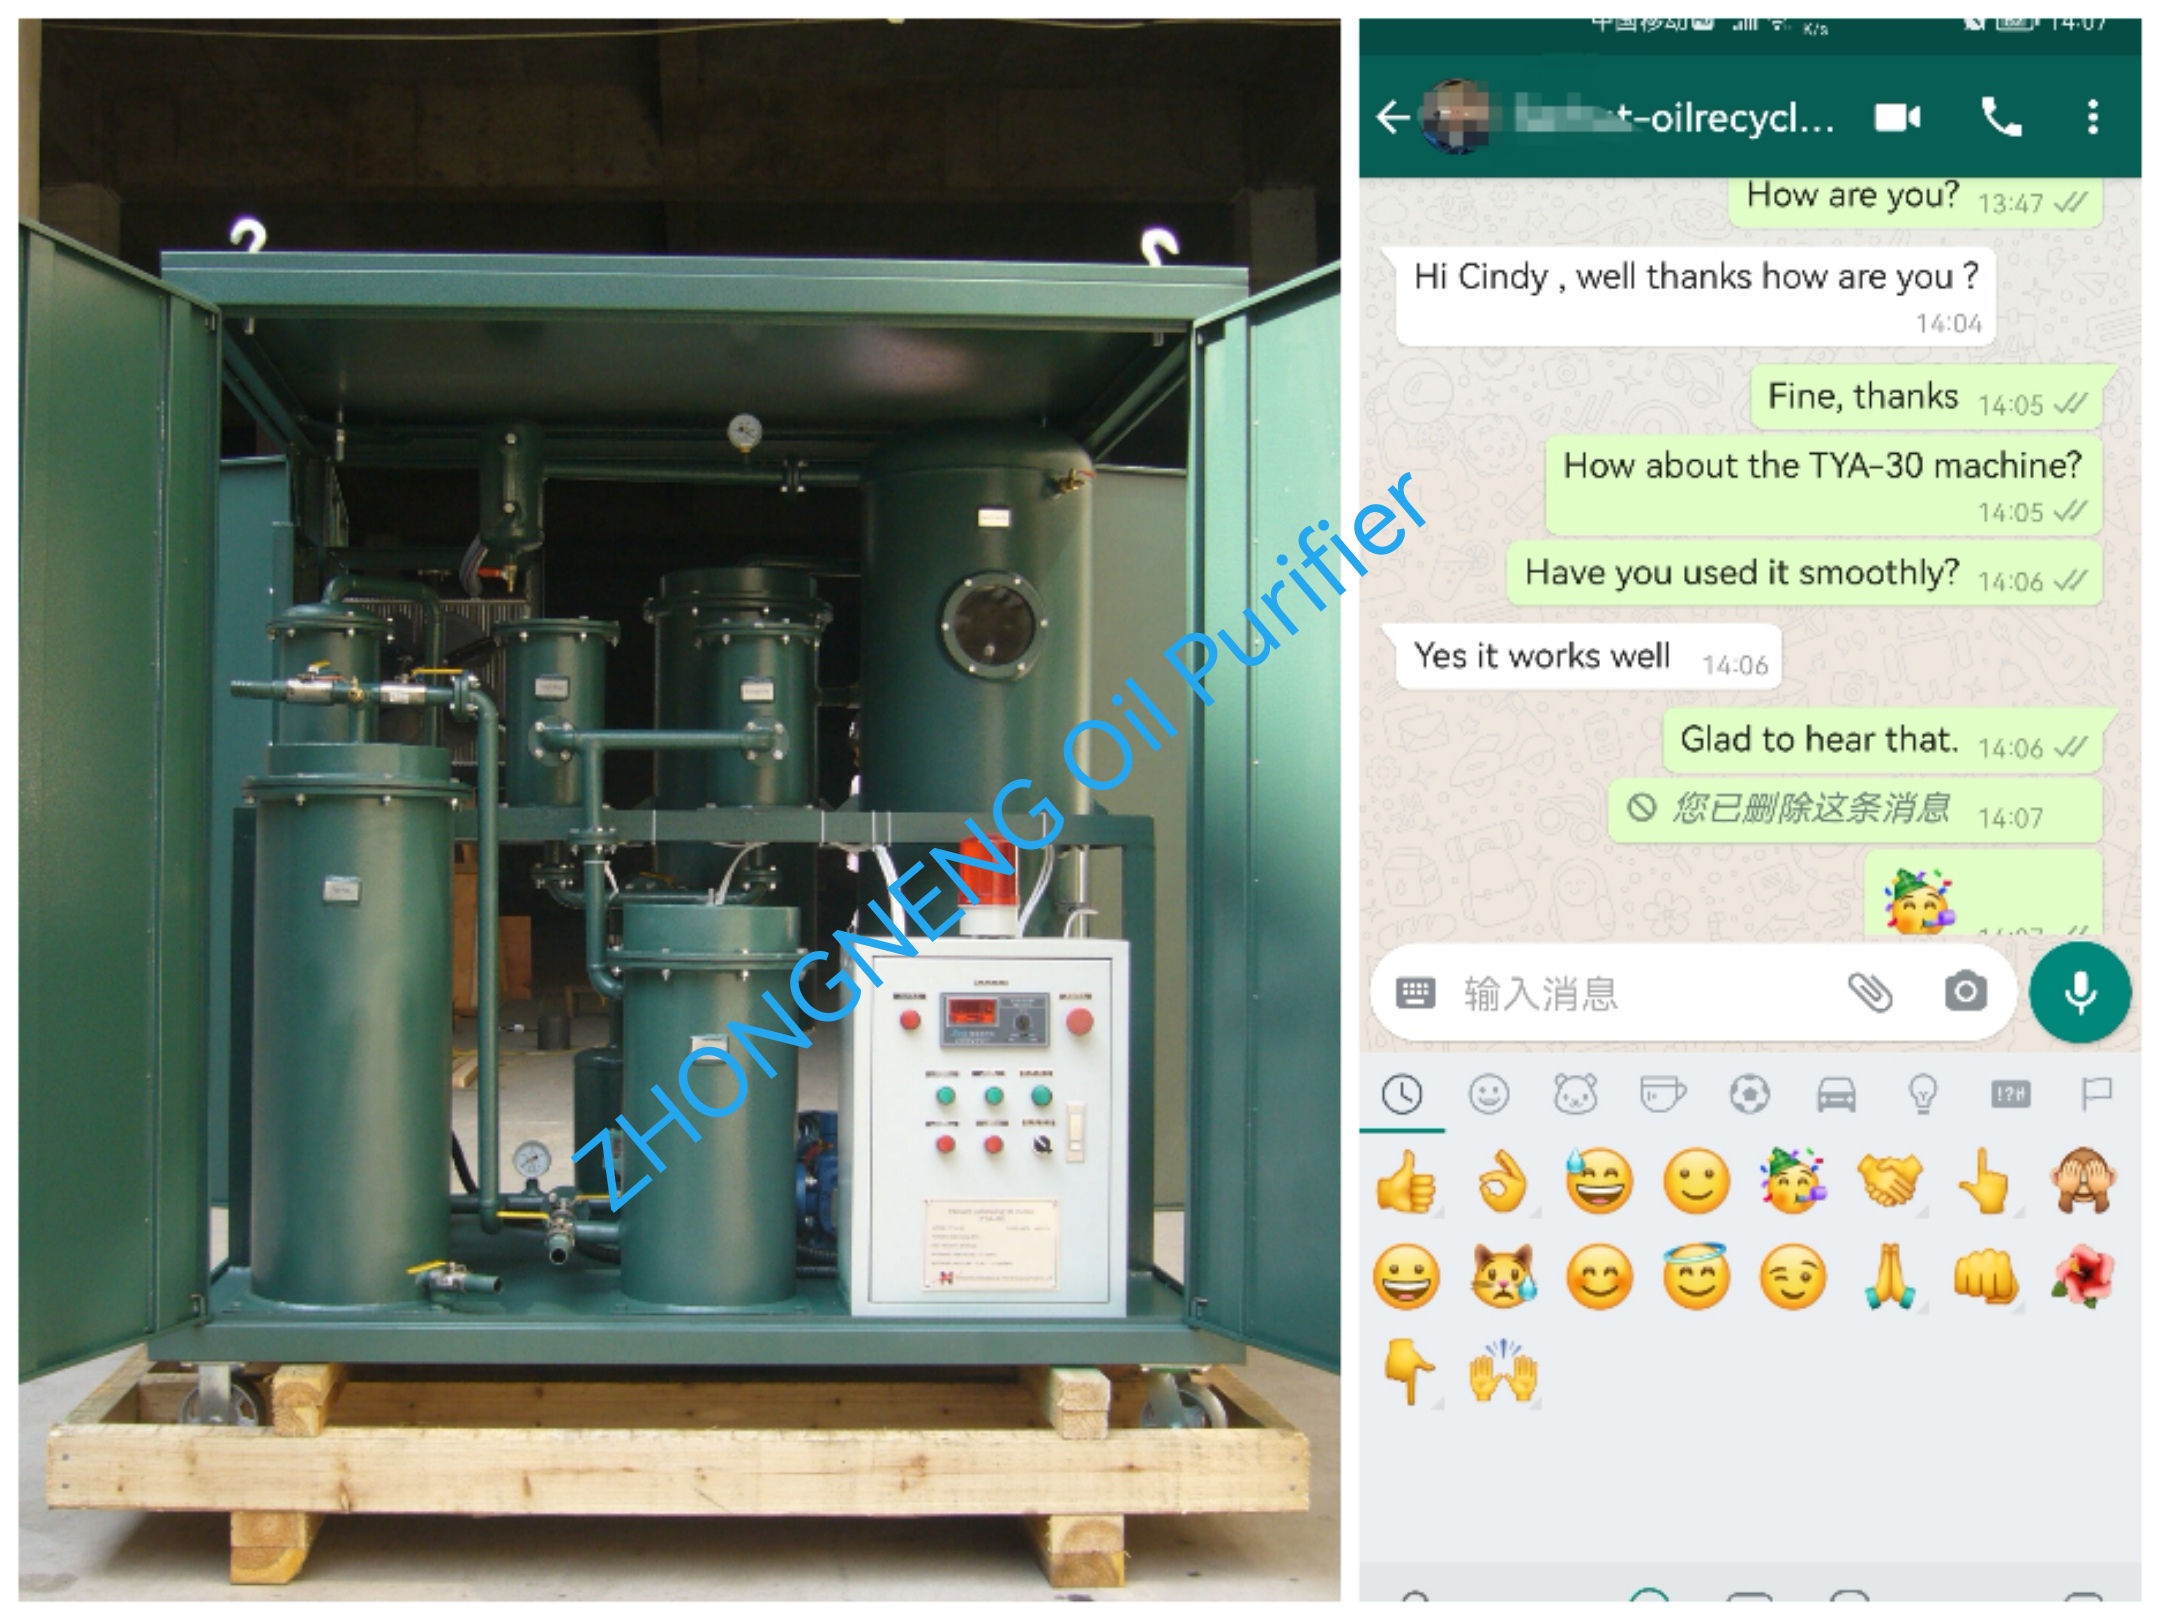 Comment about TYA-30 Vacuum Oil Purifier Machine